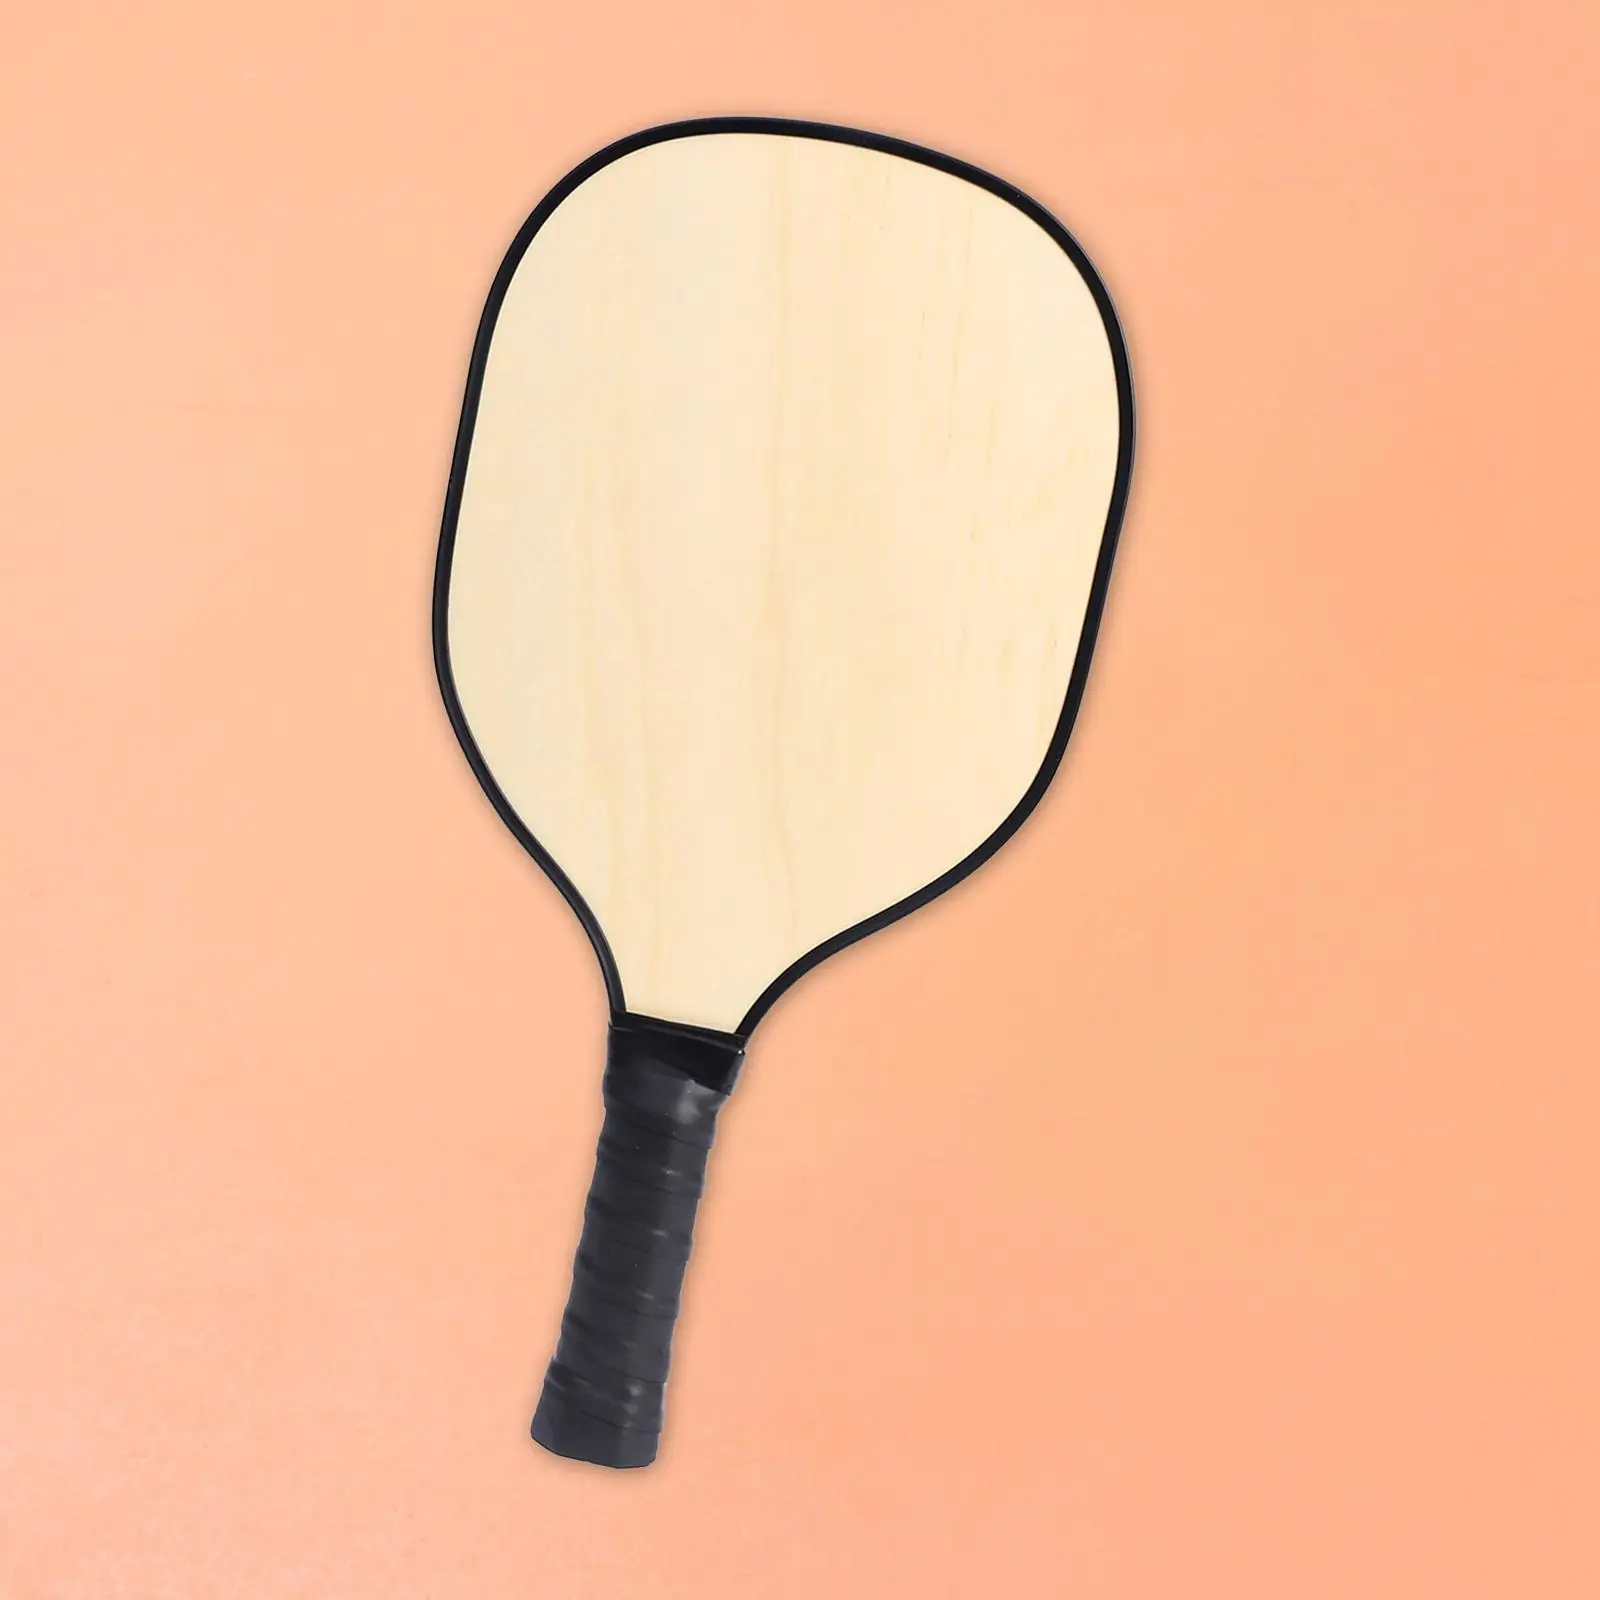 Wood Pickleball Paddles with Comfortable Gripping for Adults Play